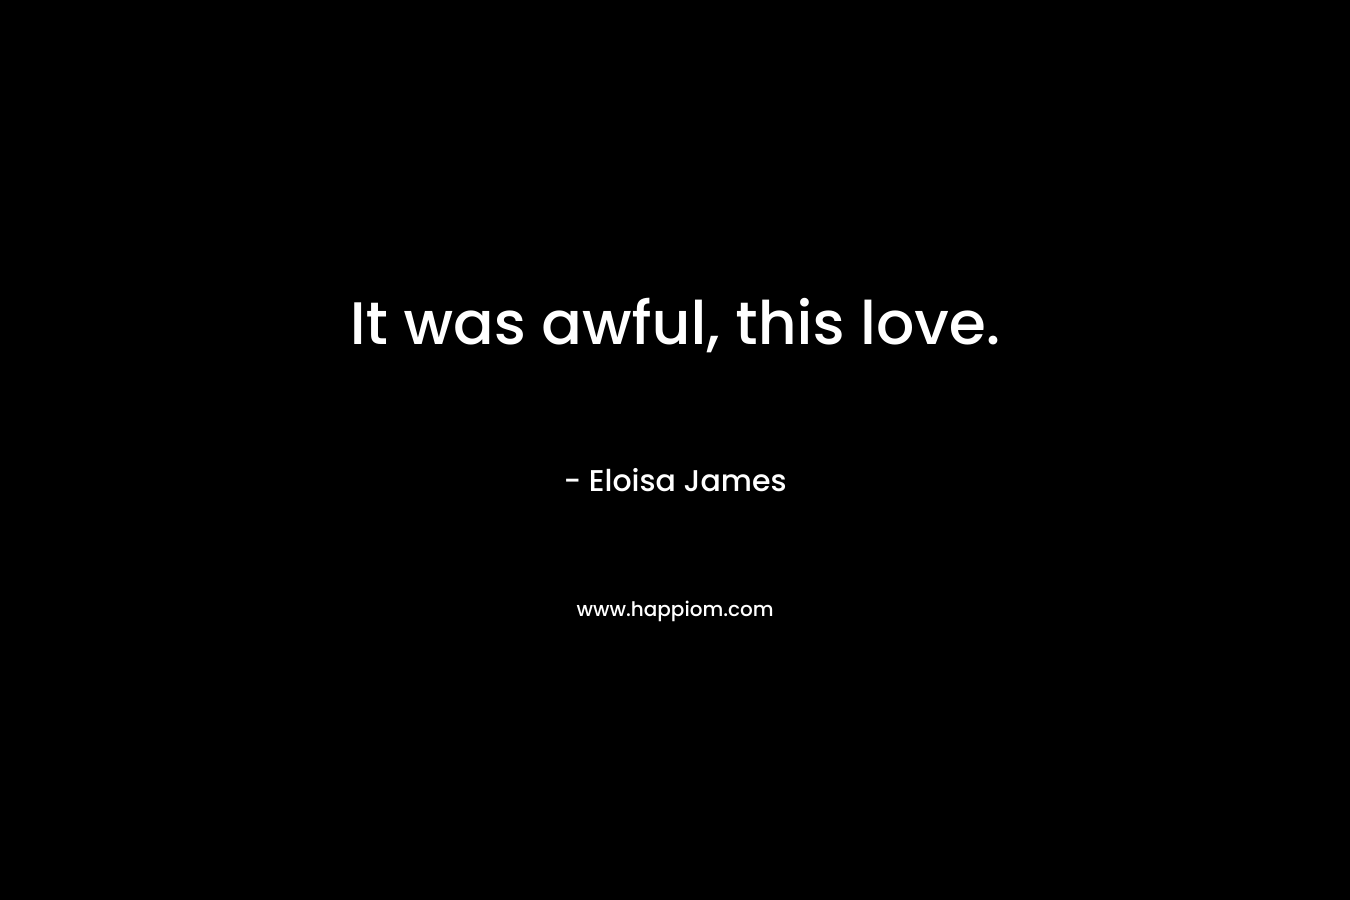 It was awful, this love.